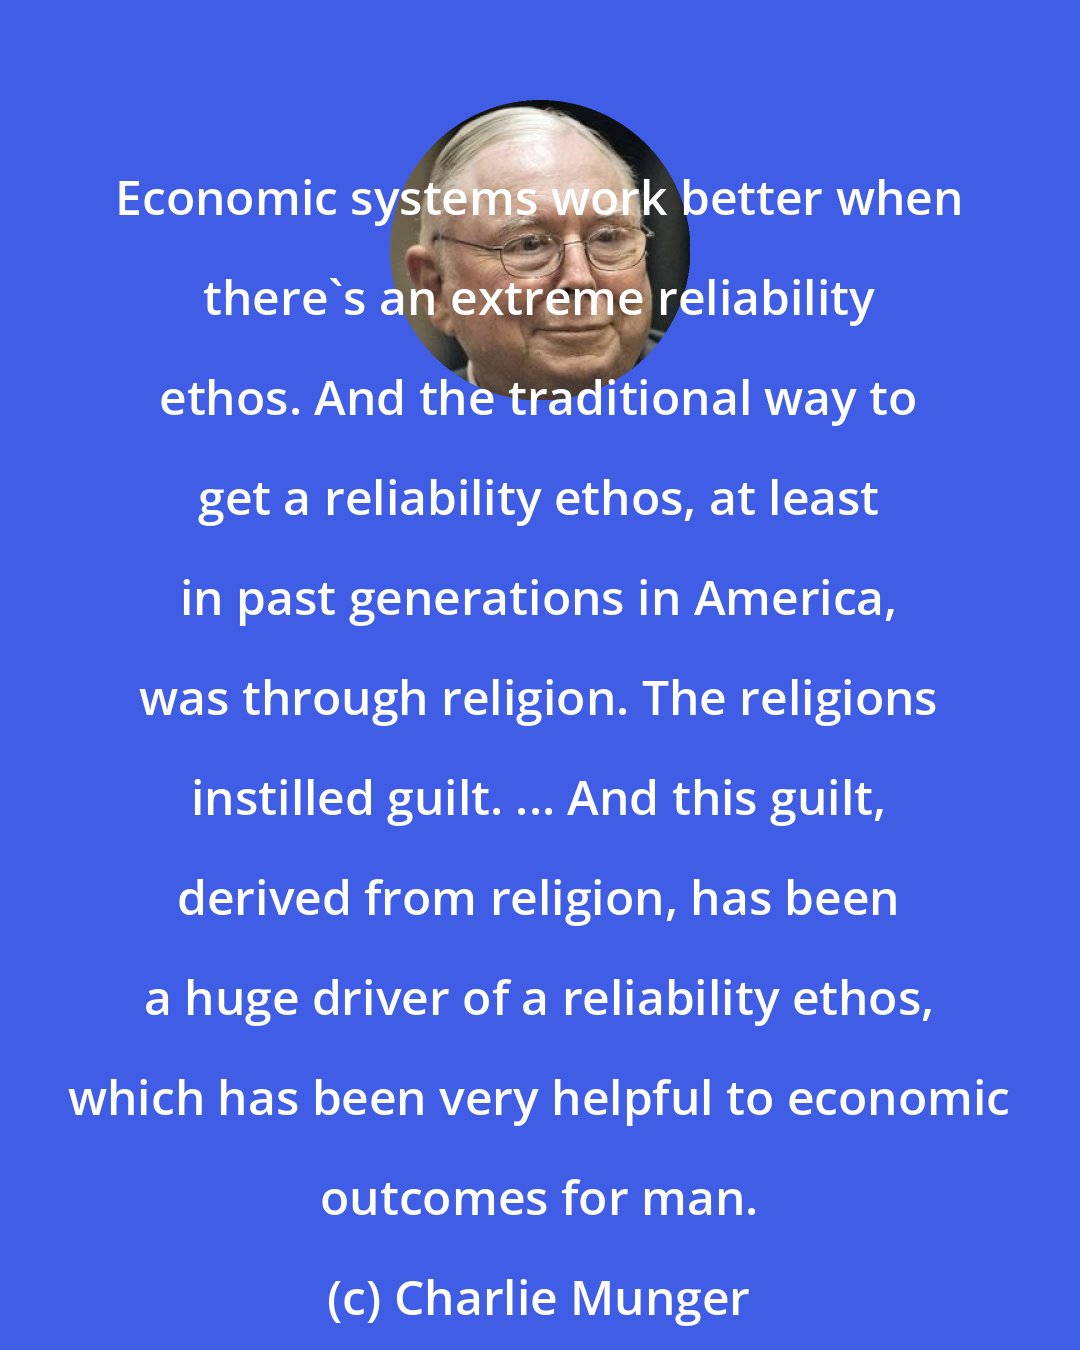 Charlie Munger: Economic systems work better when there's an extreme reliability ethos. And the traditional way to get a reliability ethos, at least in past generations in America, was through religion. The religions instilled guilt. ... And this guilt, derived from religion, has been a huge driver of a reliability ethos, which has been very helpful to economic outcomes for man.